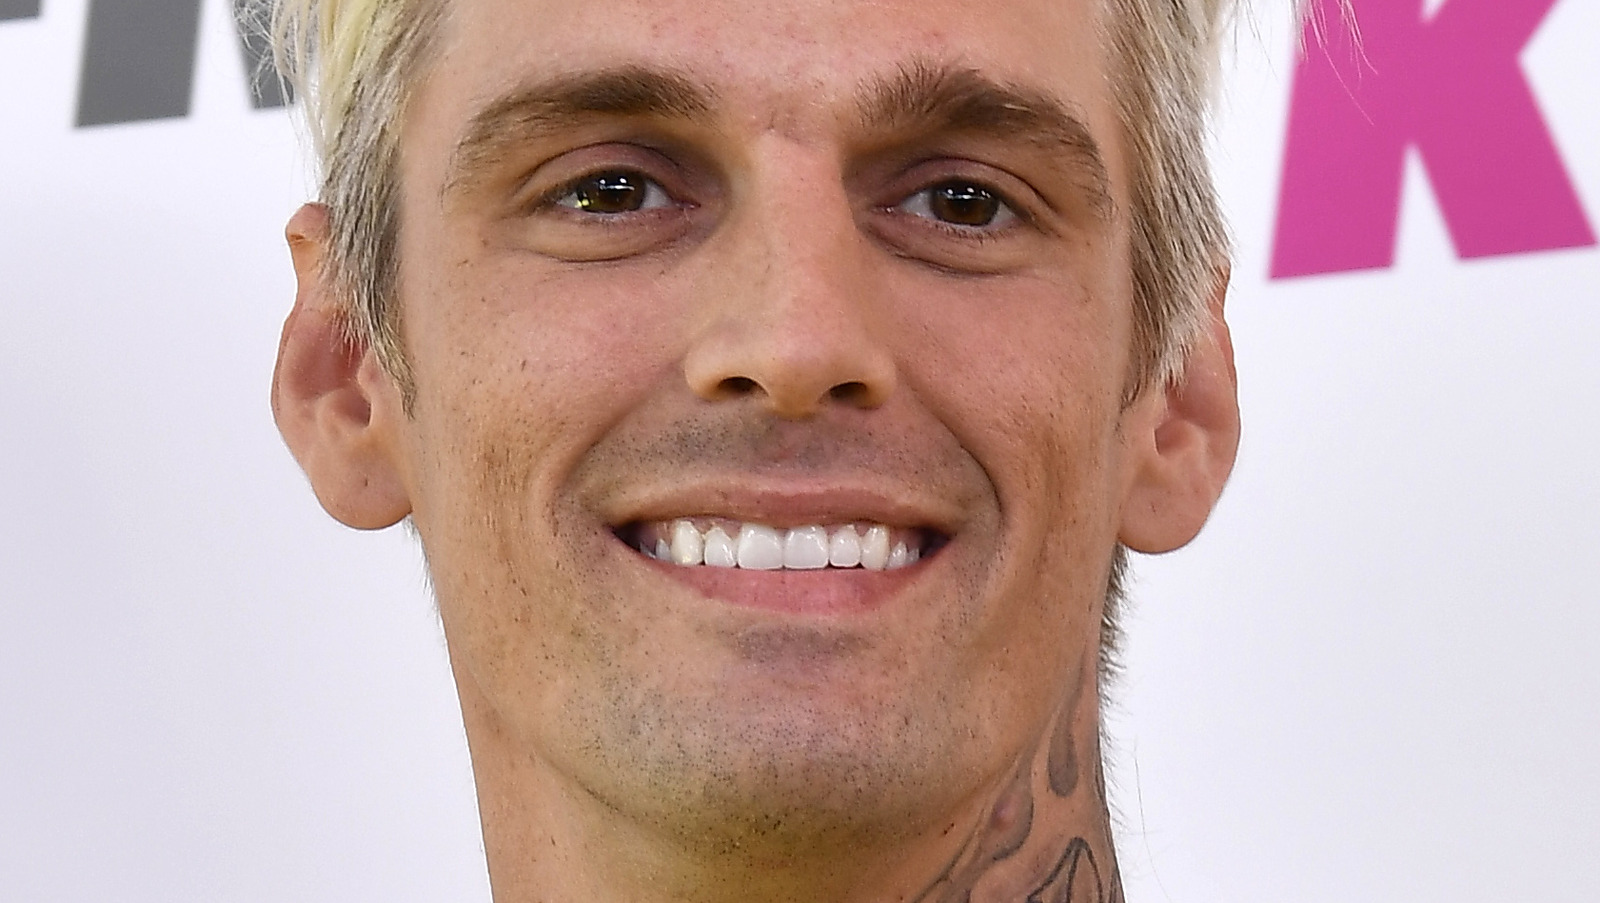 Aaron Carter S Mom Jane Carter Has Lingering Questions About His Tragic Death